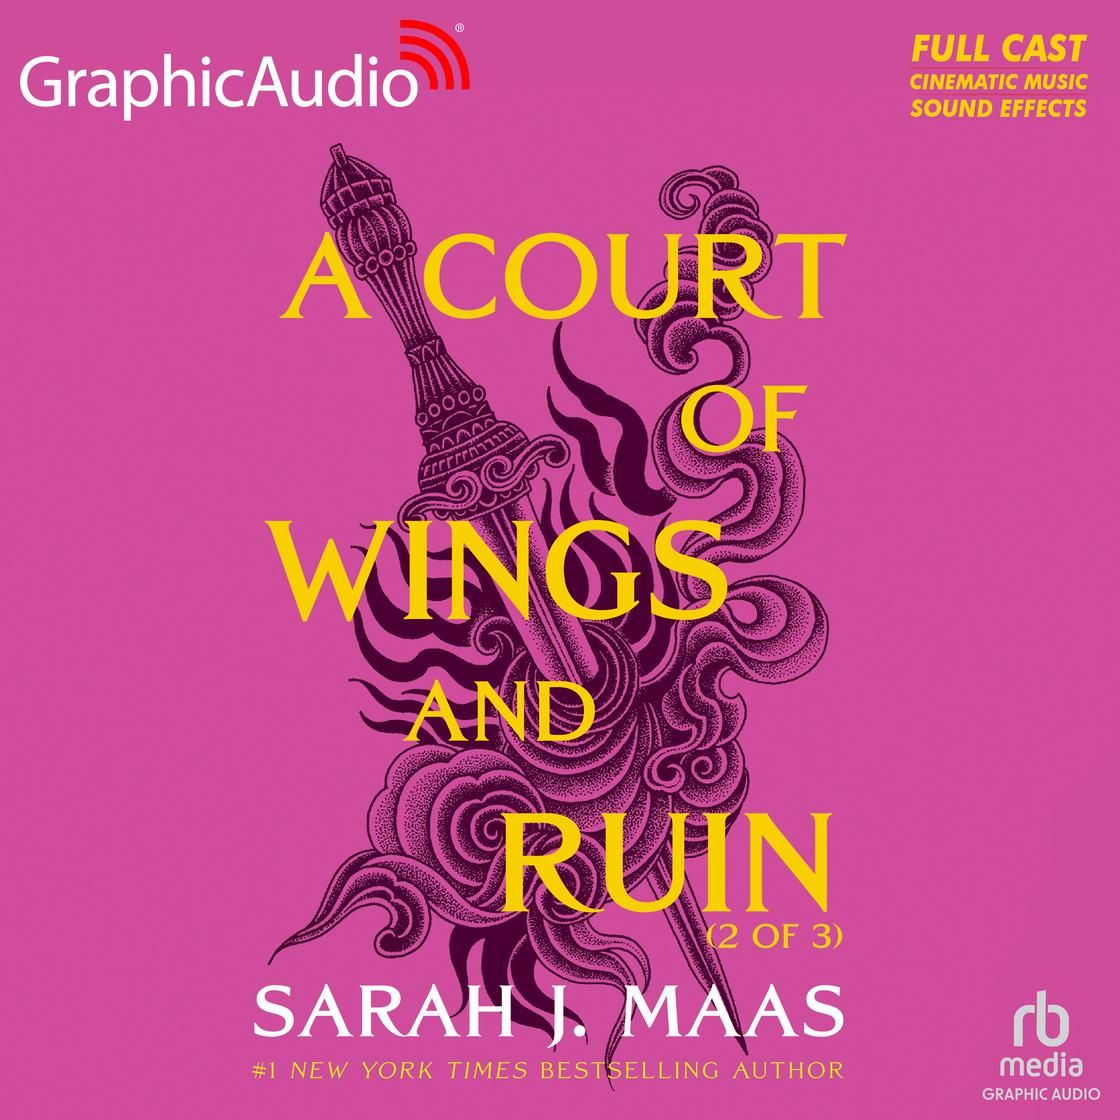 A Court of Wings and Ruin (2 of 3) [Dramatized Adaptation] | Libro.fm (US)